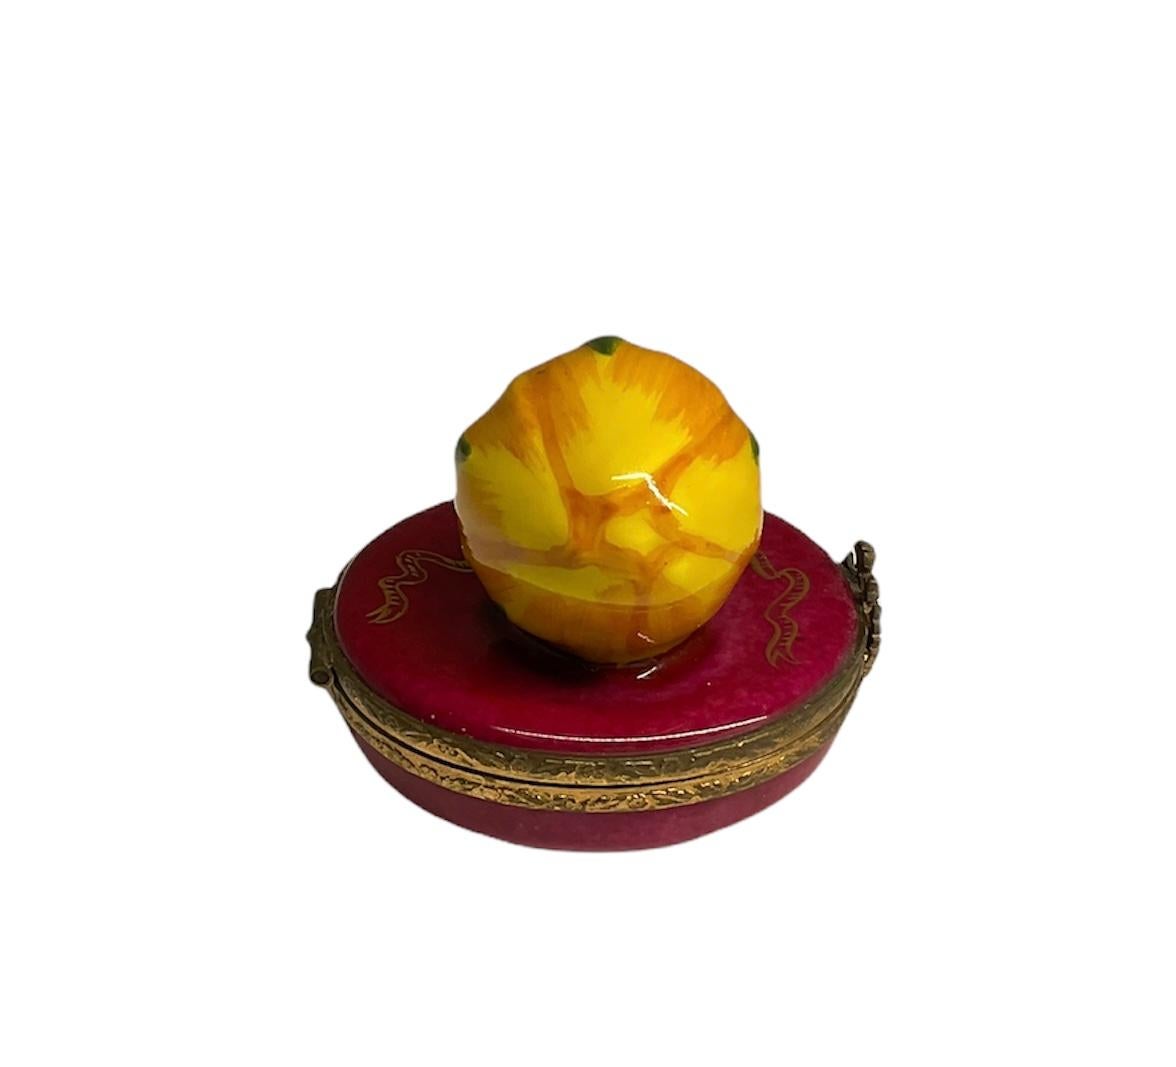 This is a Limoges France Faberge Porcelain rose bud trinket hinged box. It is depicting a large yellow rose bud at the top of an oval cranberry color box. This top also has a gold hand painted laurel wreath with a bow and long ribbons. Inside the